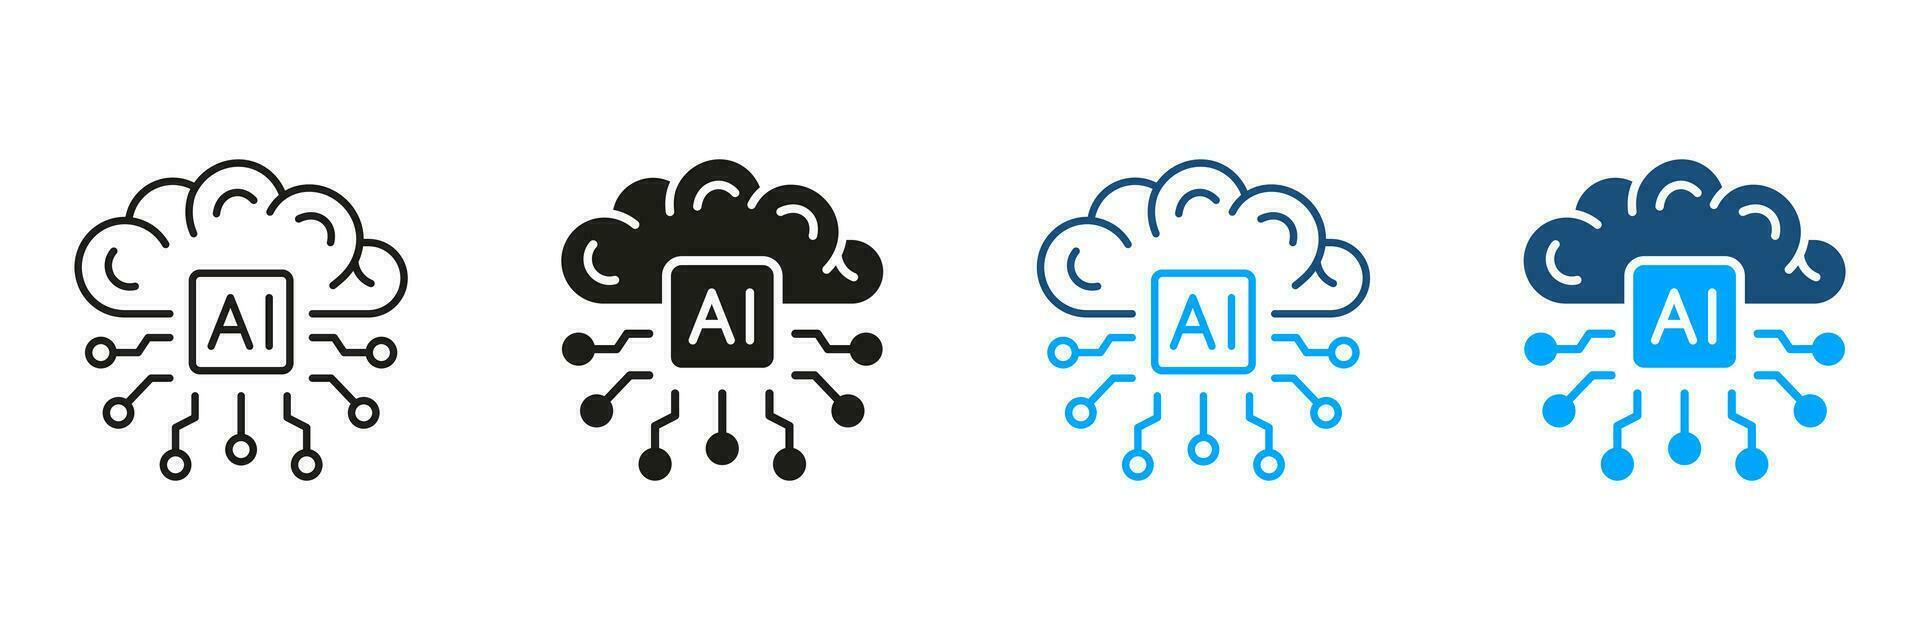 Digital Technology Concept. Tech Science Black and Color Symbol Collection. Artificial Intelligence Silhouette and Line Icons Set. Human Brain with Circuit Pictogram. Isolated Vector Illustration.